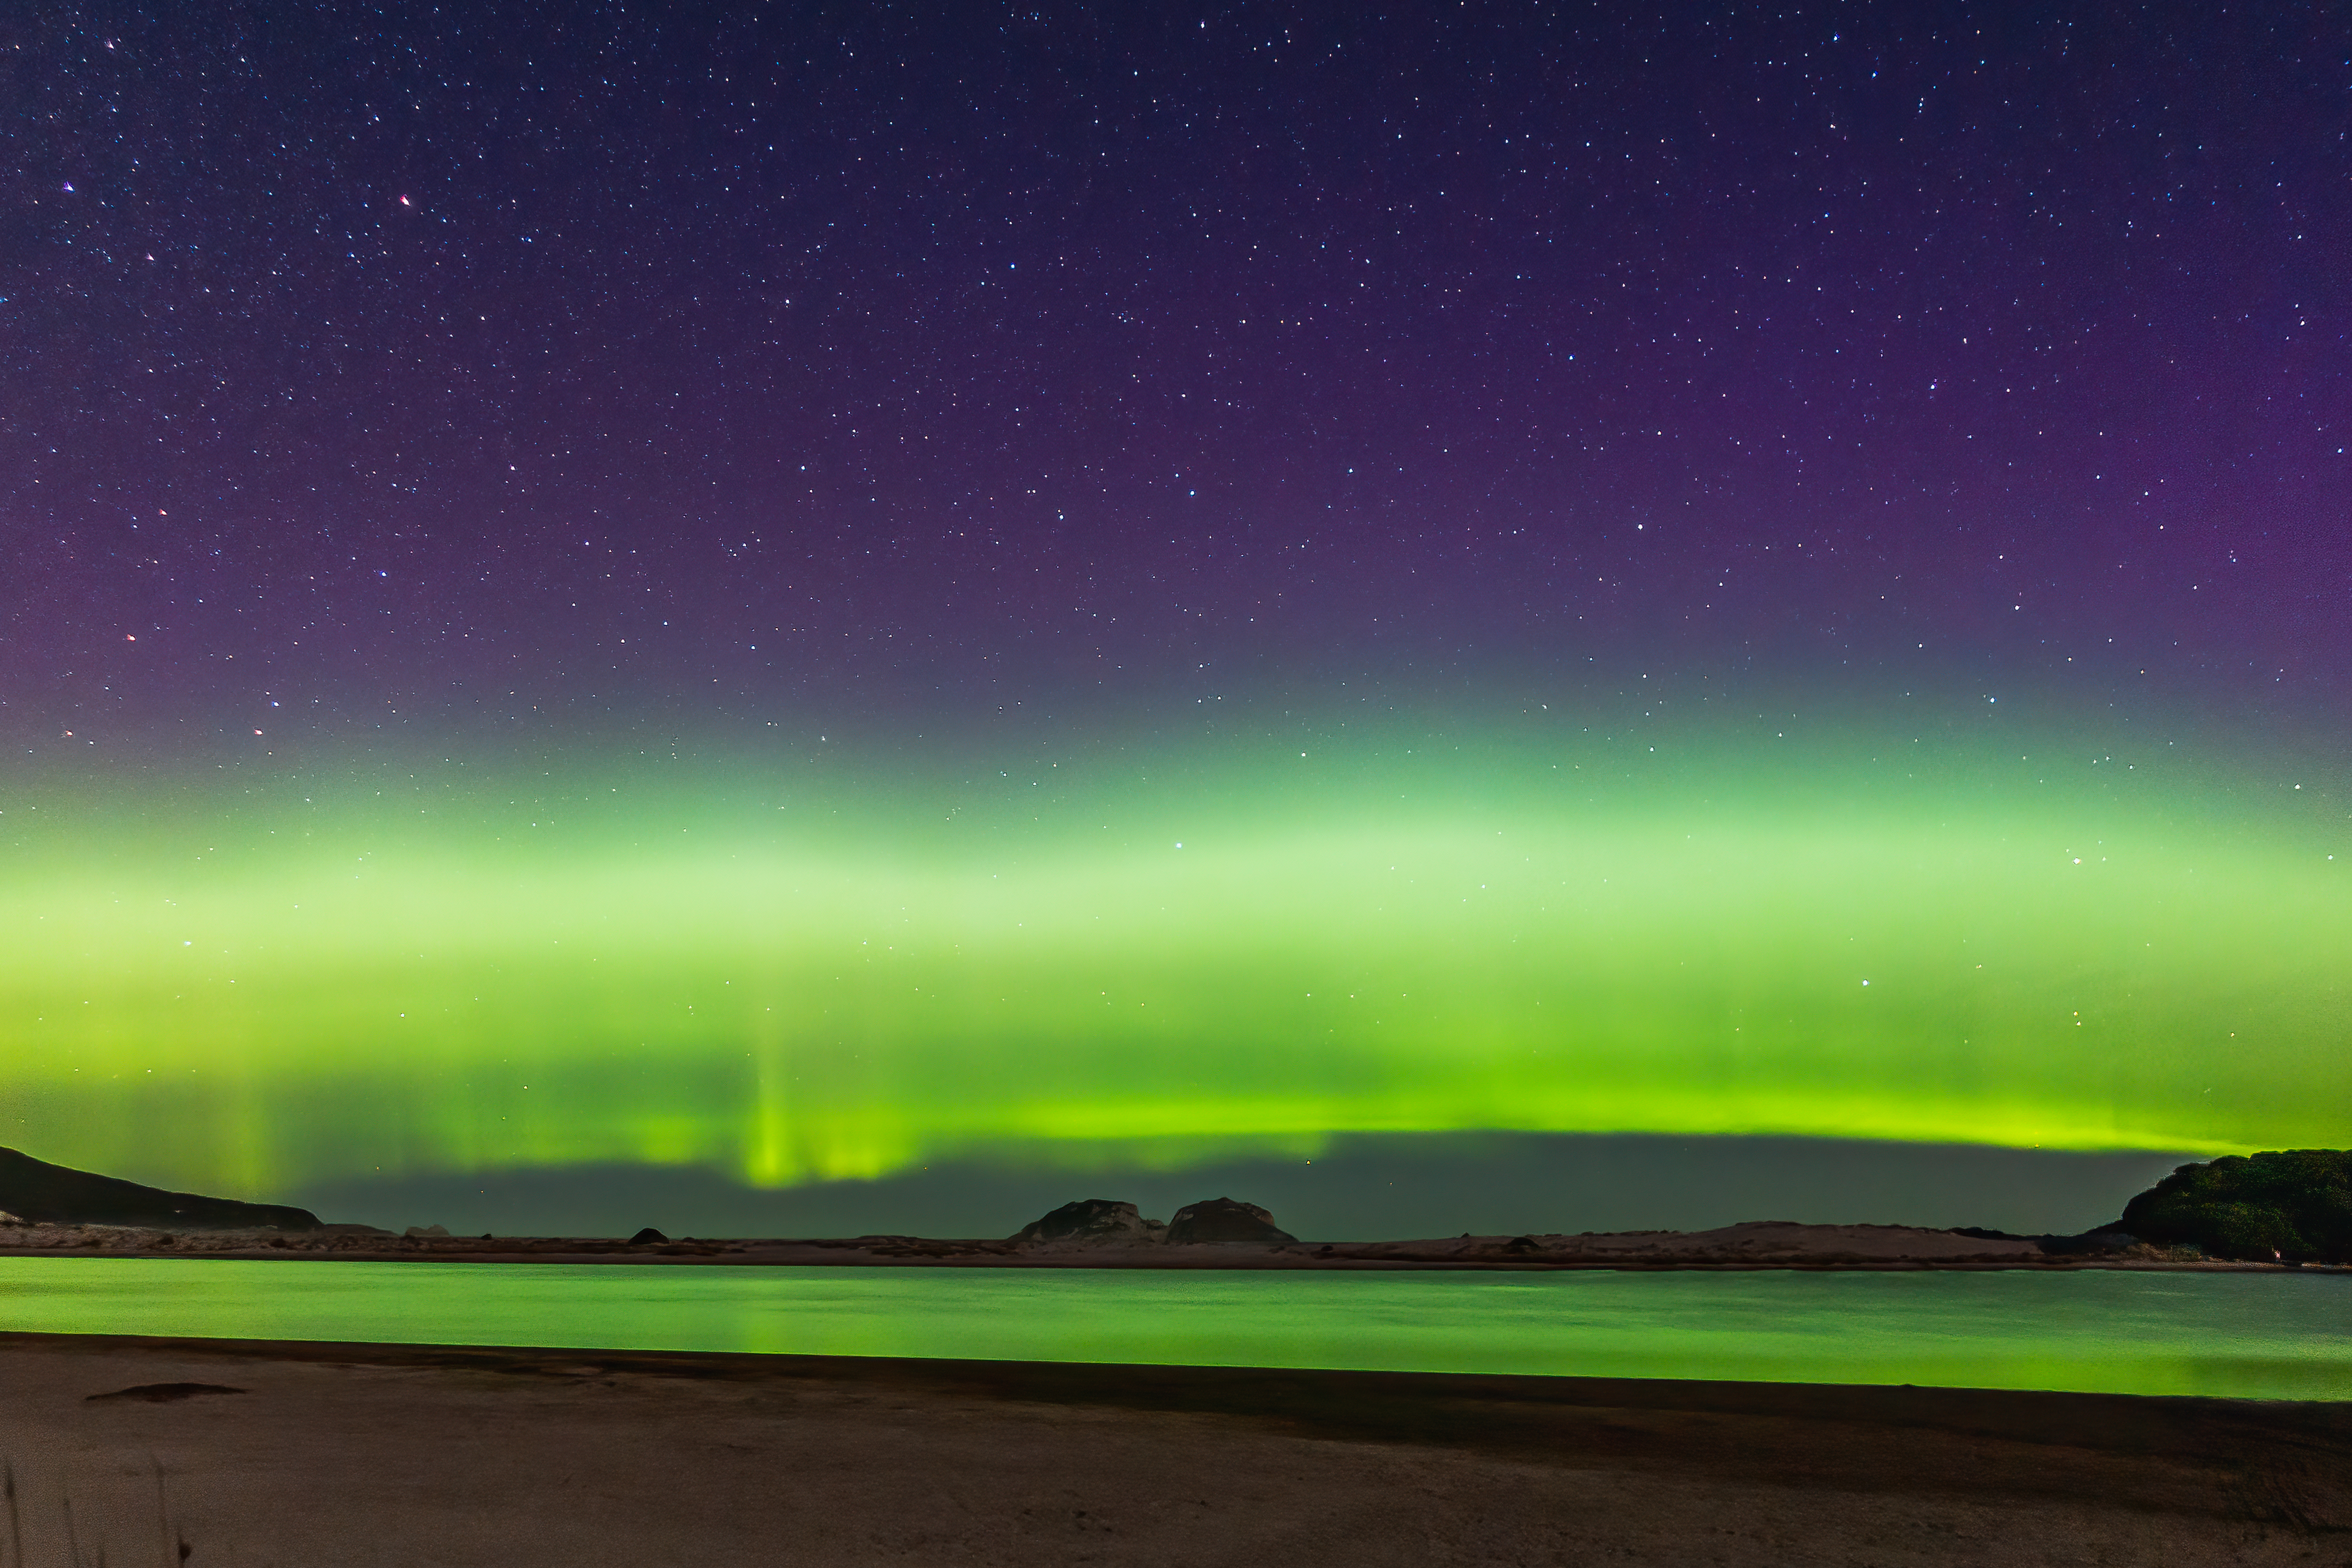 Beach glowing green reflecting the Aurora Australis along the South Coast Track.